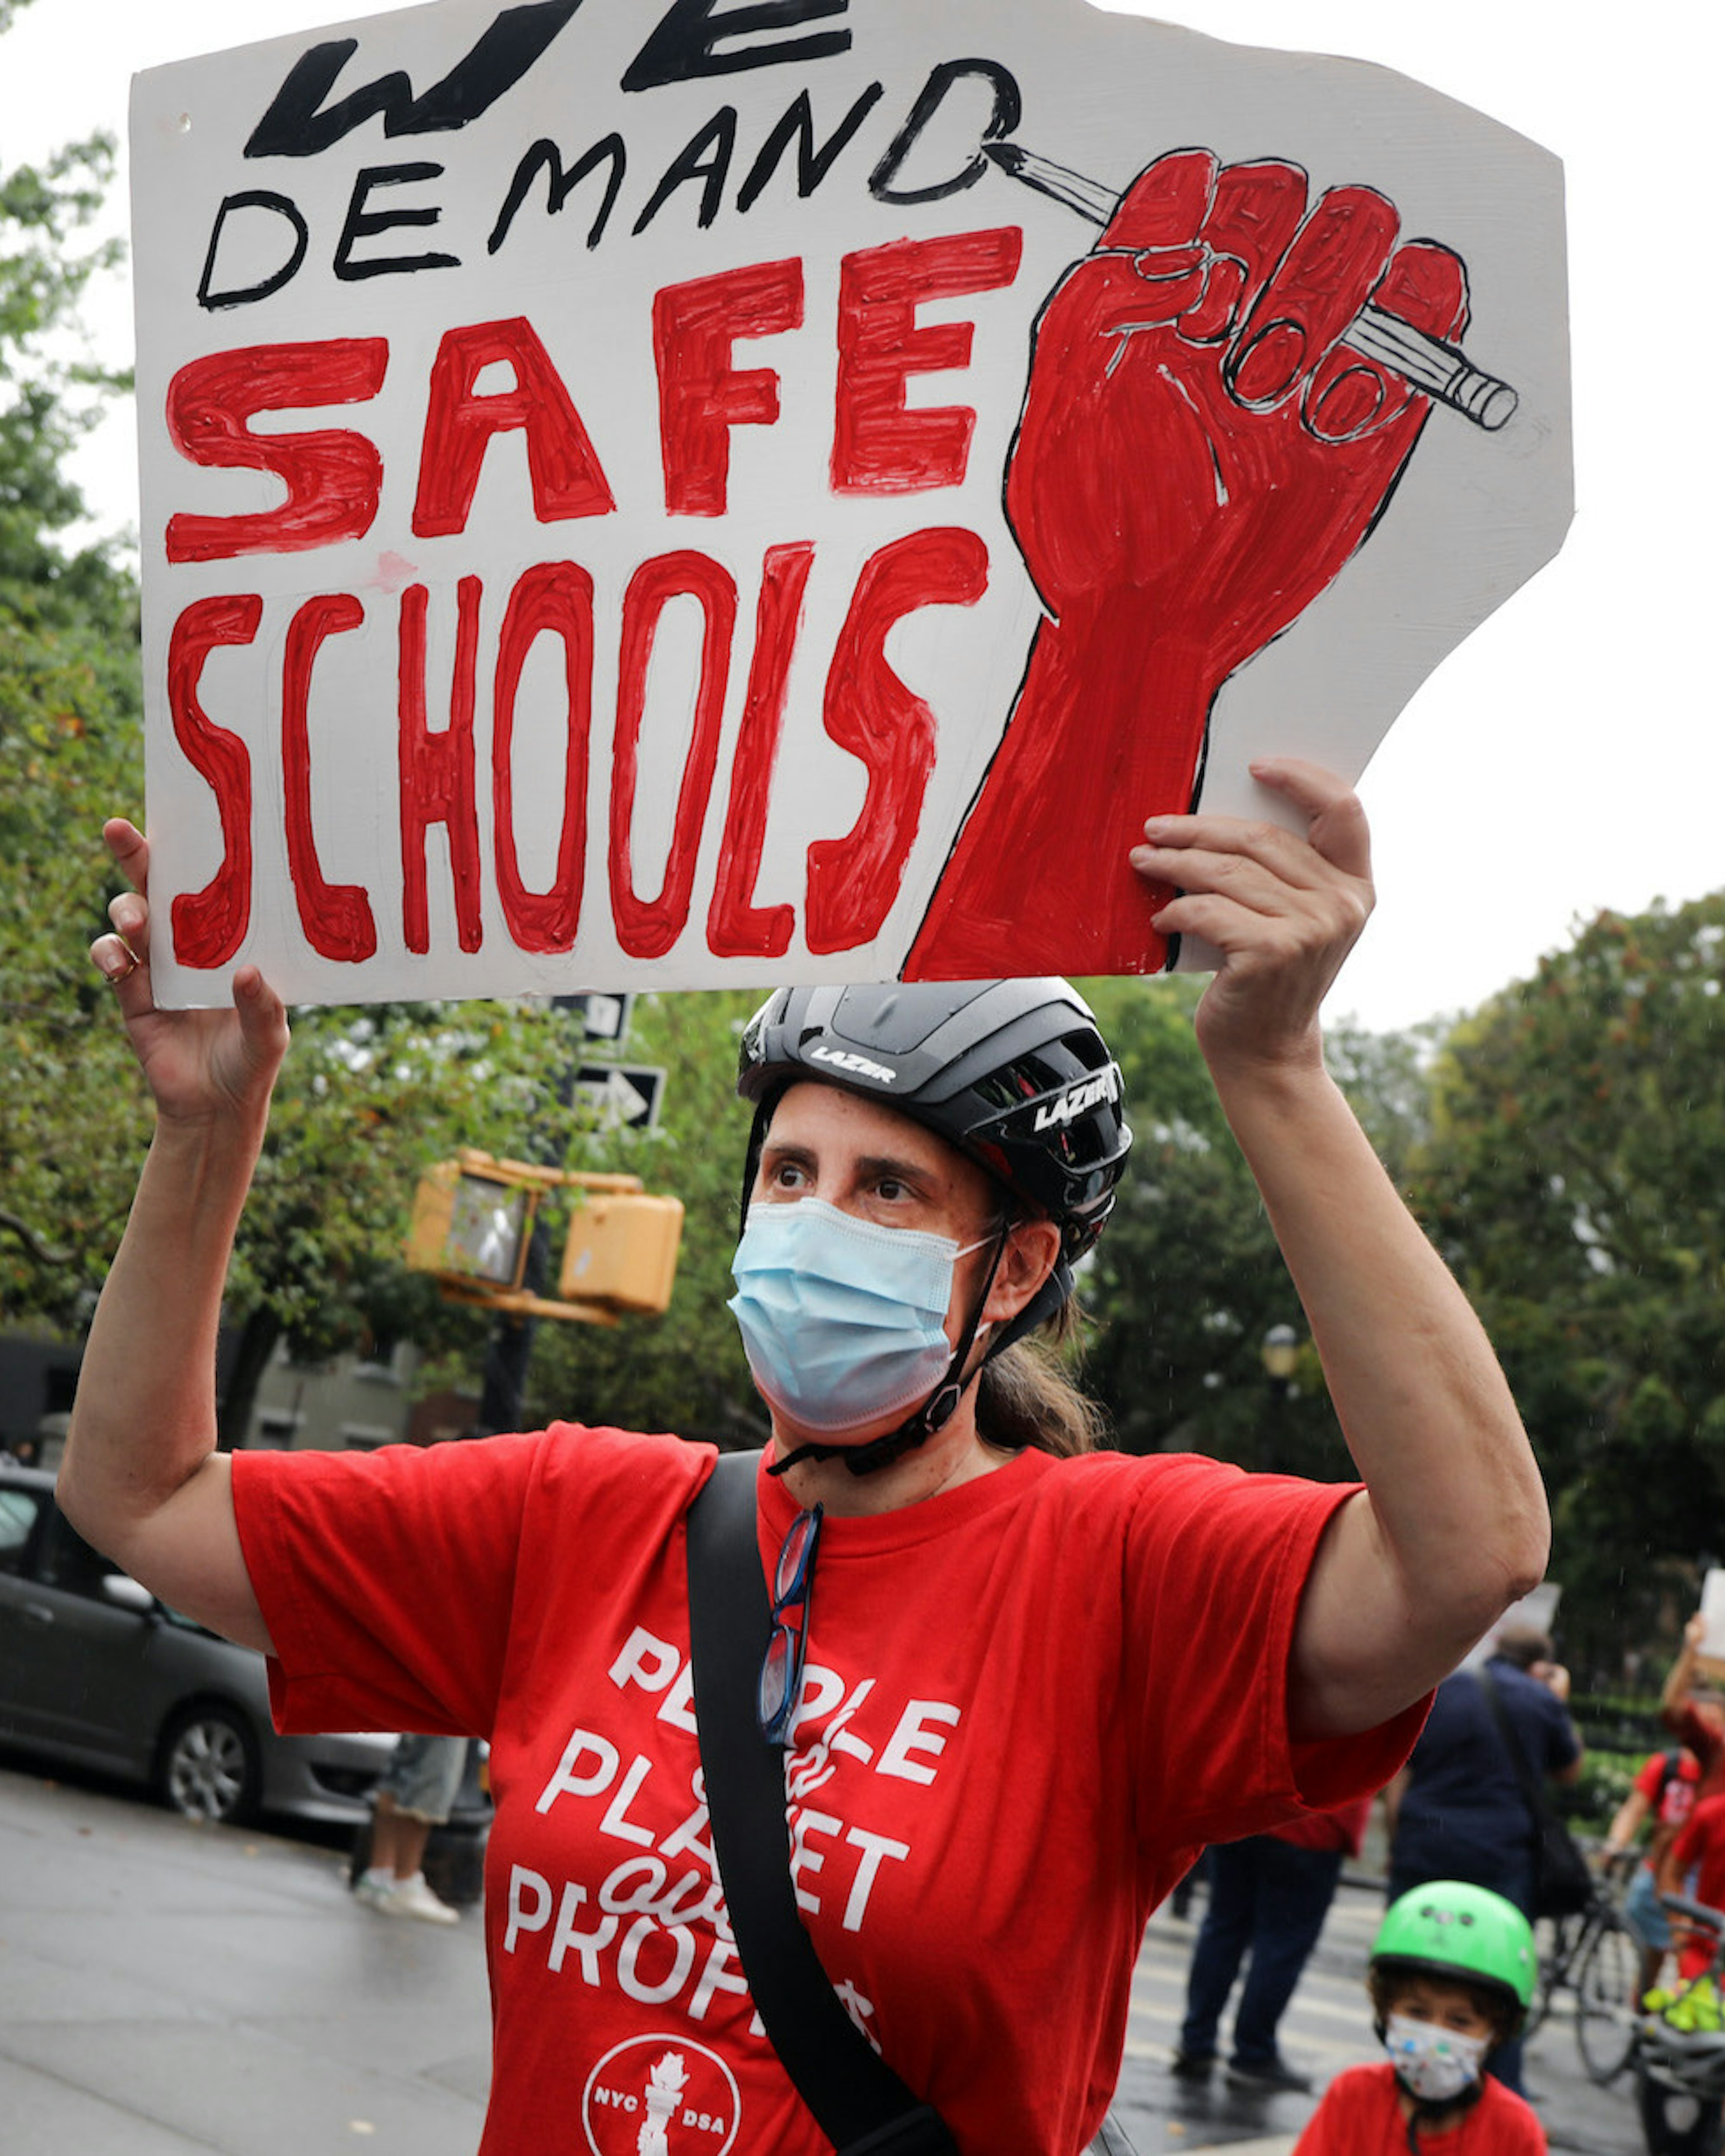 Members of the teachers union, parents and students participate in a march through Brooklyn to demand a safer teaching environment for themselves and for students during the Covid-19 pandemic on September 1, 2020 in New York City. As confusion about the start of the school year continues, New York City Mayor Bill de Blasio announced on Tuesday that the start of the school year will be delayed amid the threat of a teacher strike. (Photo by Spencer Platt/Getty Images)